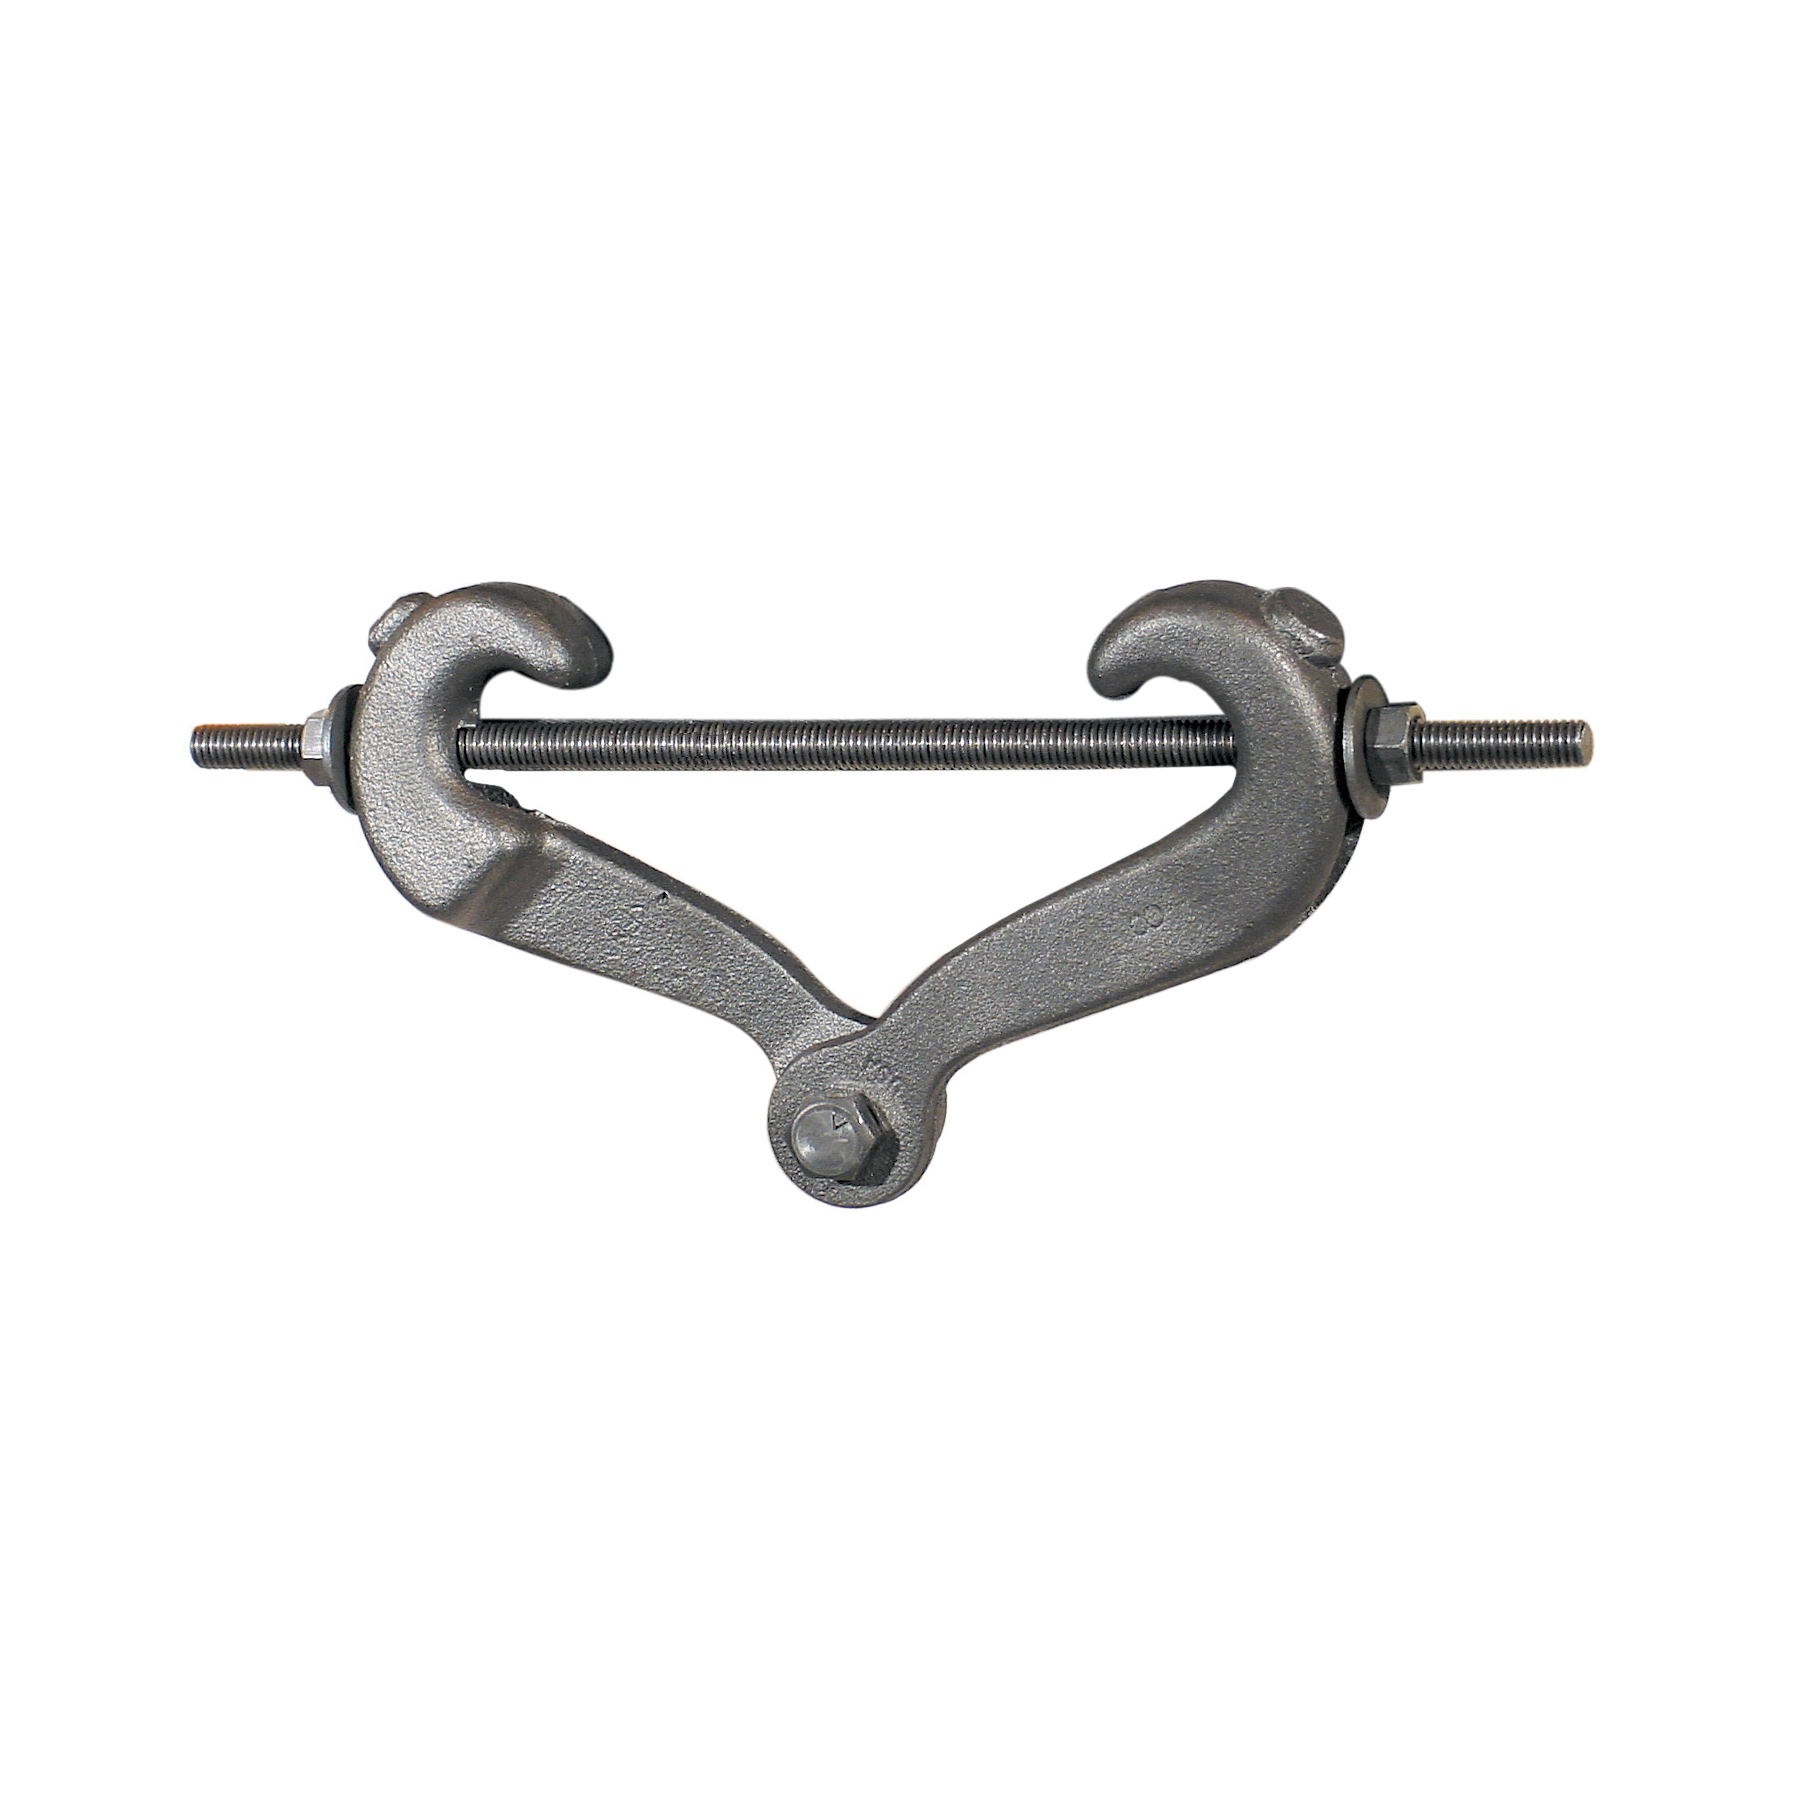 ANVIL FIG 94 WIDE THROAT TOP BEAM CLAMP FOR 3/4"-12 ROD 